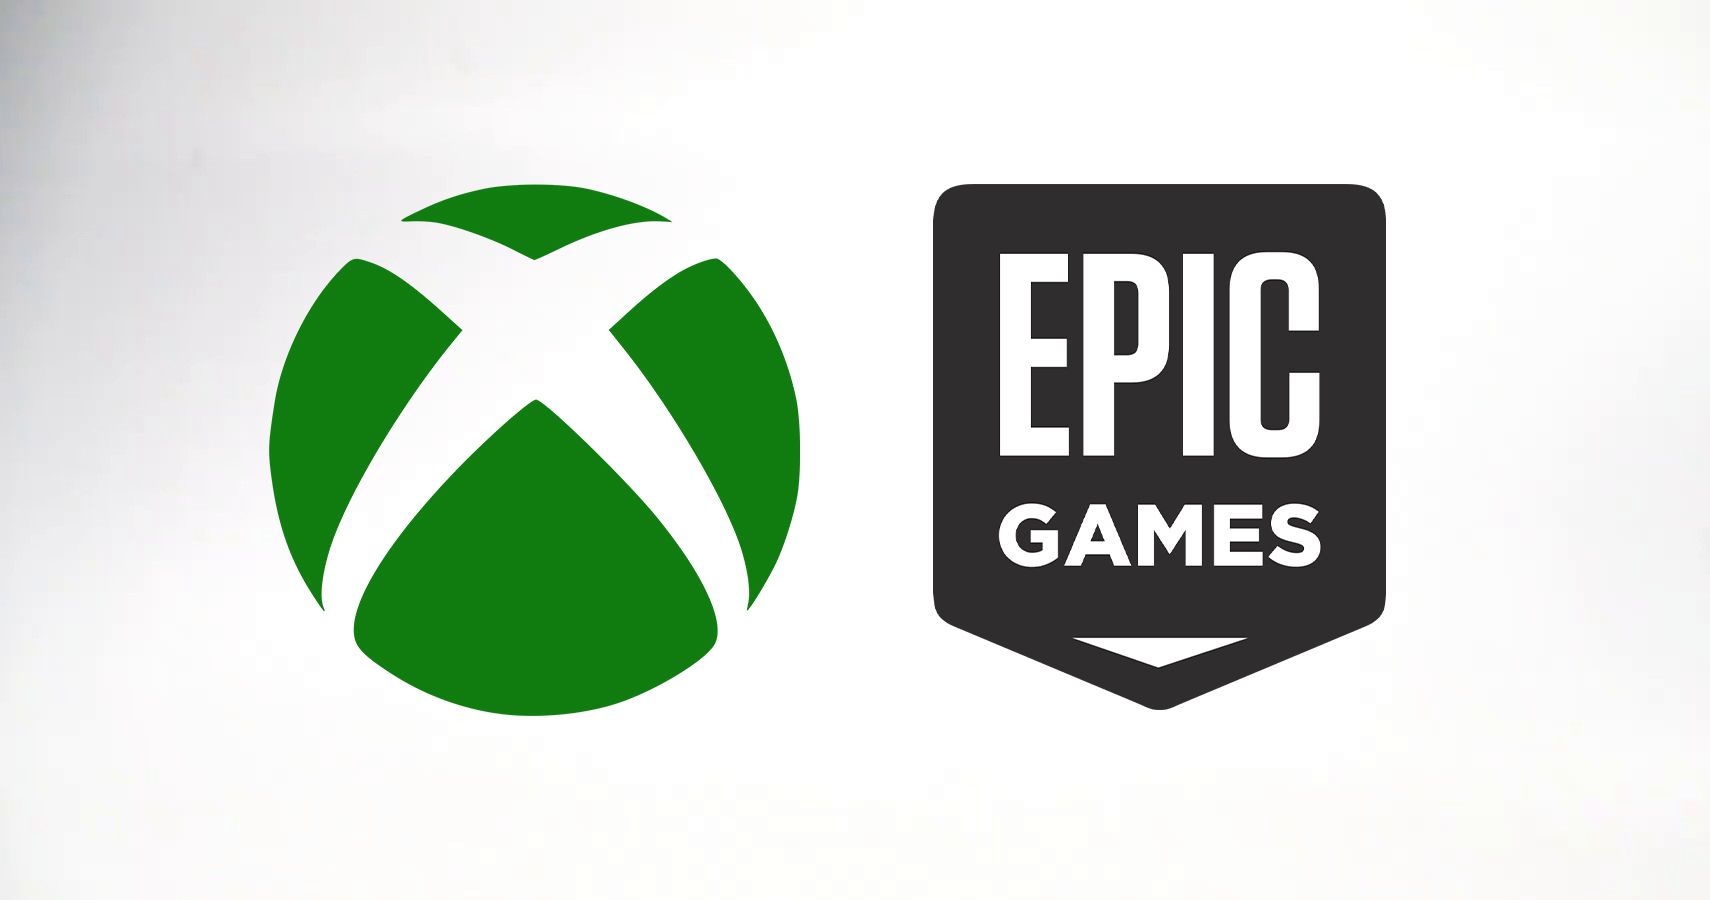 Microsoft files statement in support of Epic